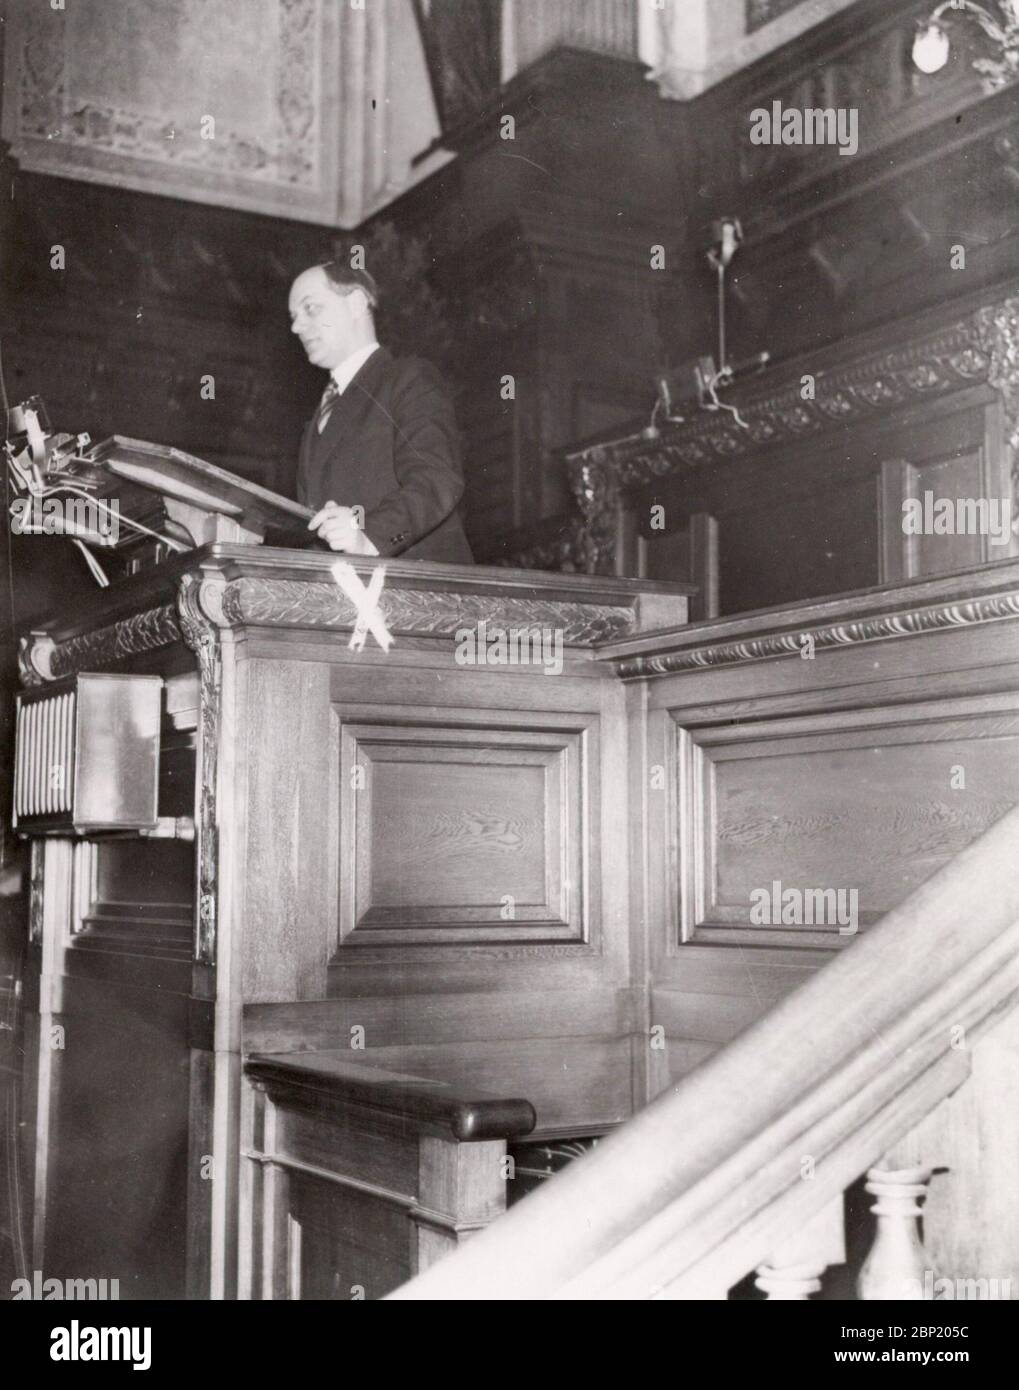 Reichsminister Rosenberg Speech Heinrich Hoffmann Photographs 1933 Adolf Hitler's official photographer, and a Nazi politician and publisher, who was a member of Hitler's intimate circle. Stock Photo